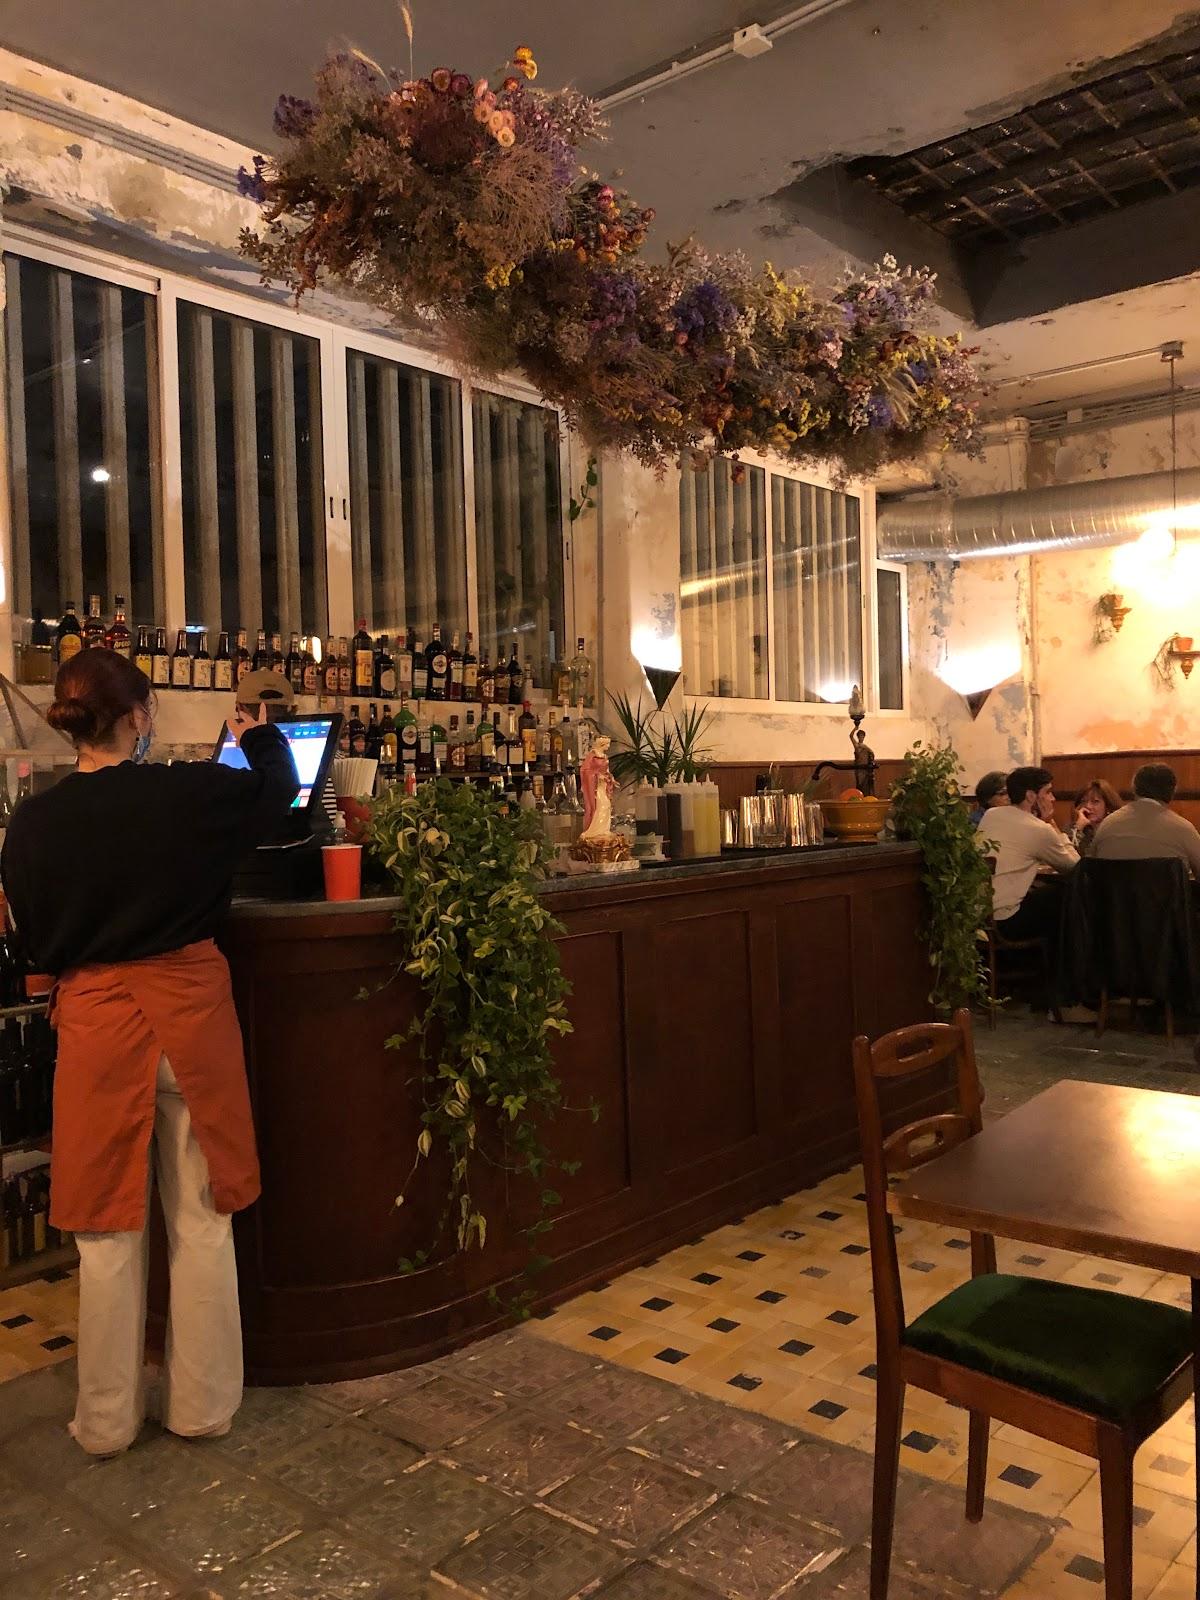 This is Lisbon's most talked-about hidden restaurant, Comadre